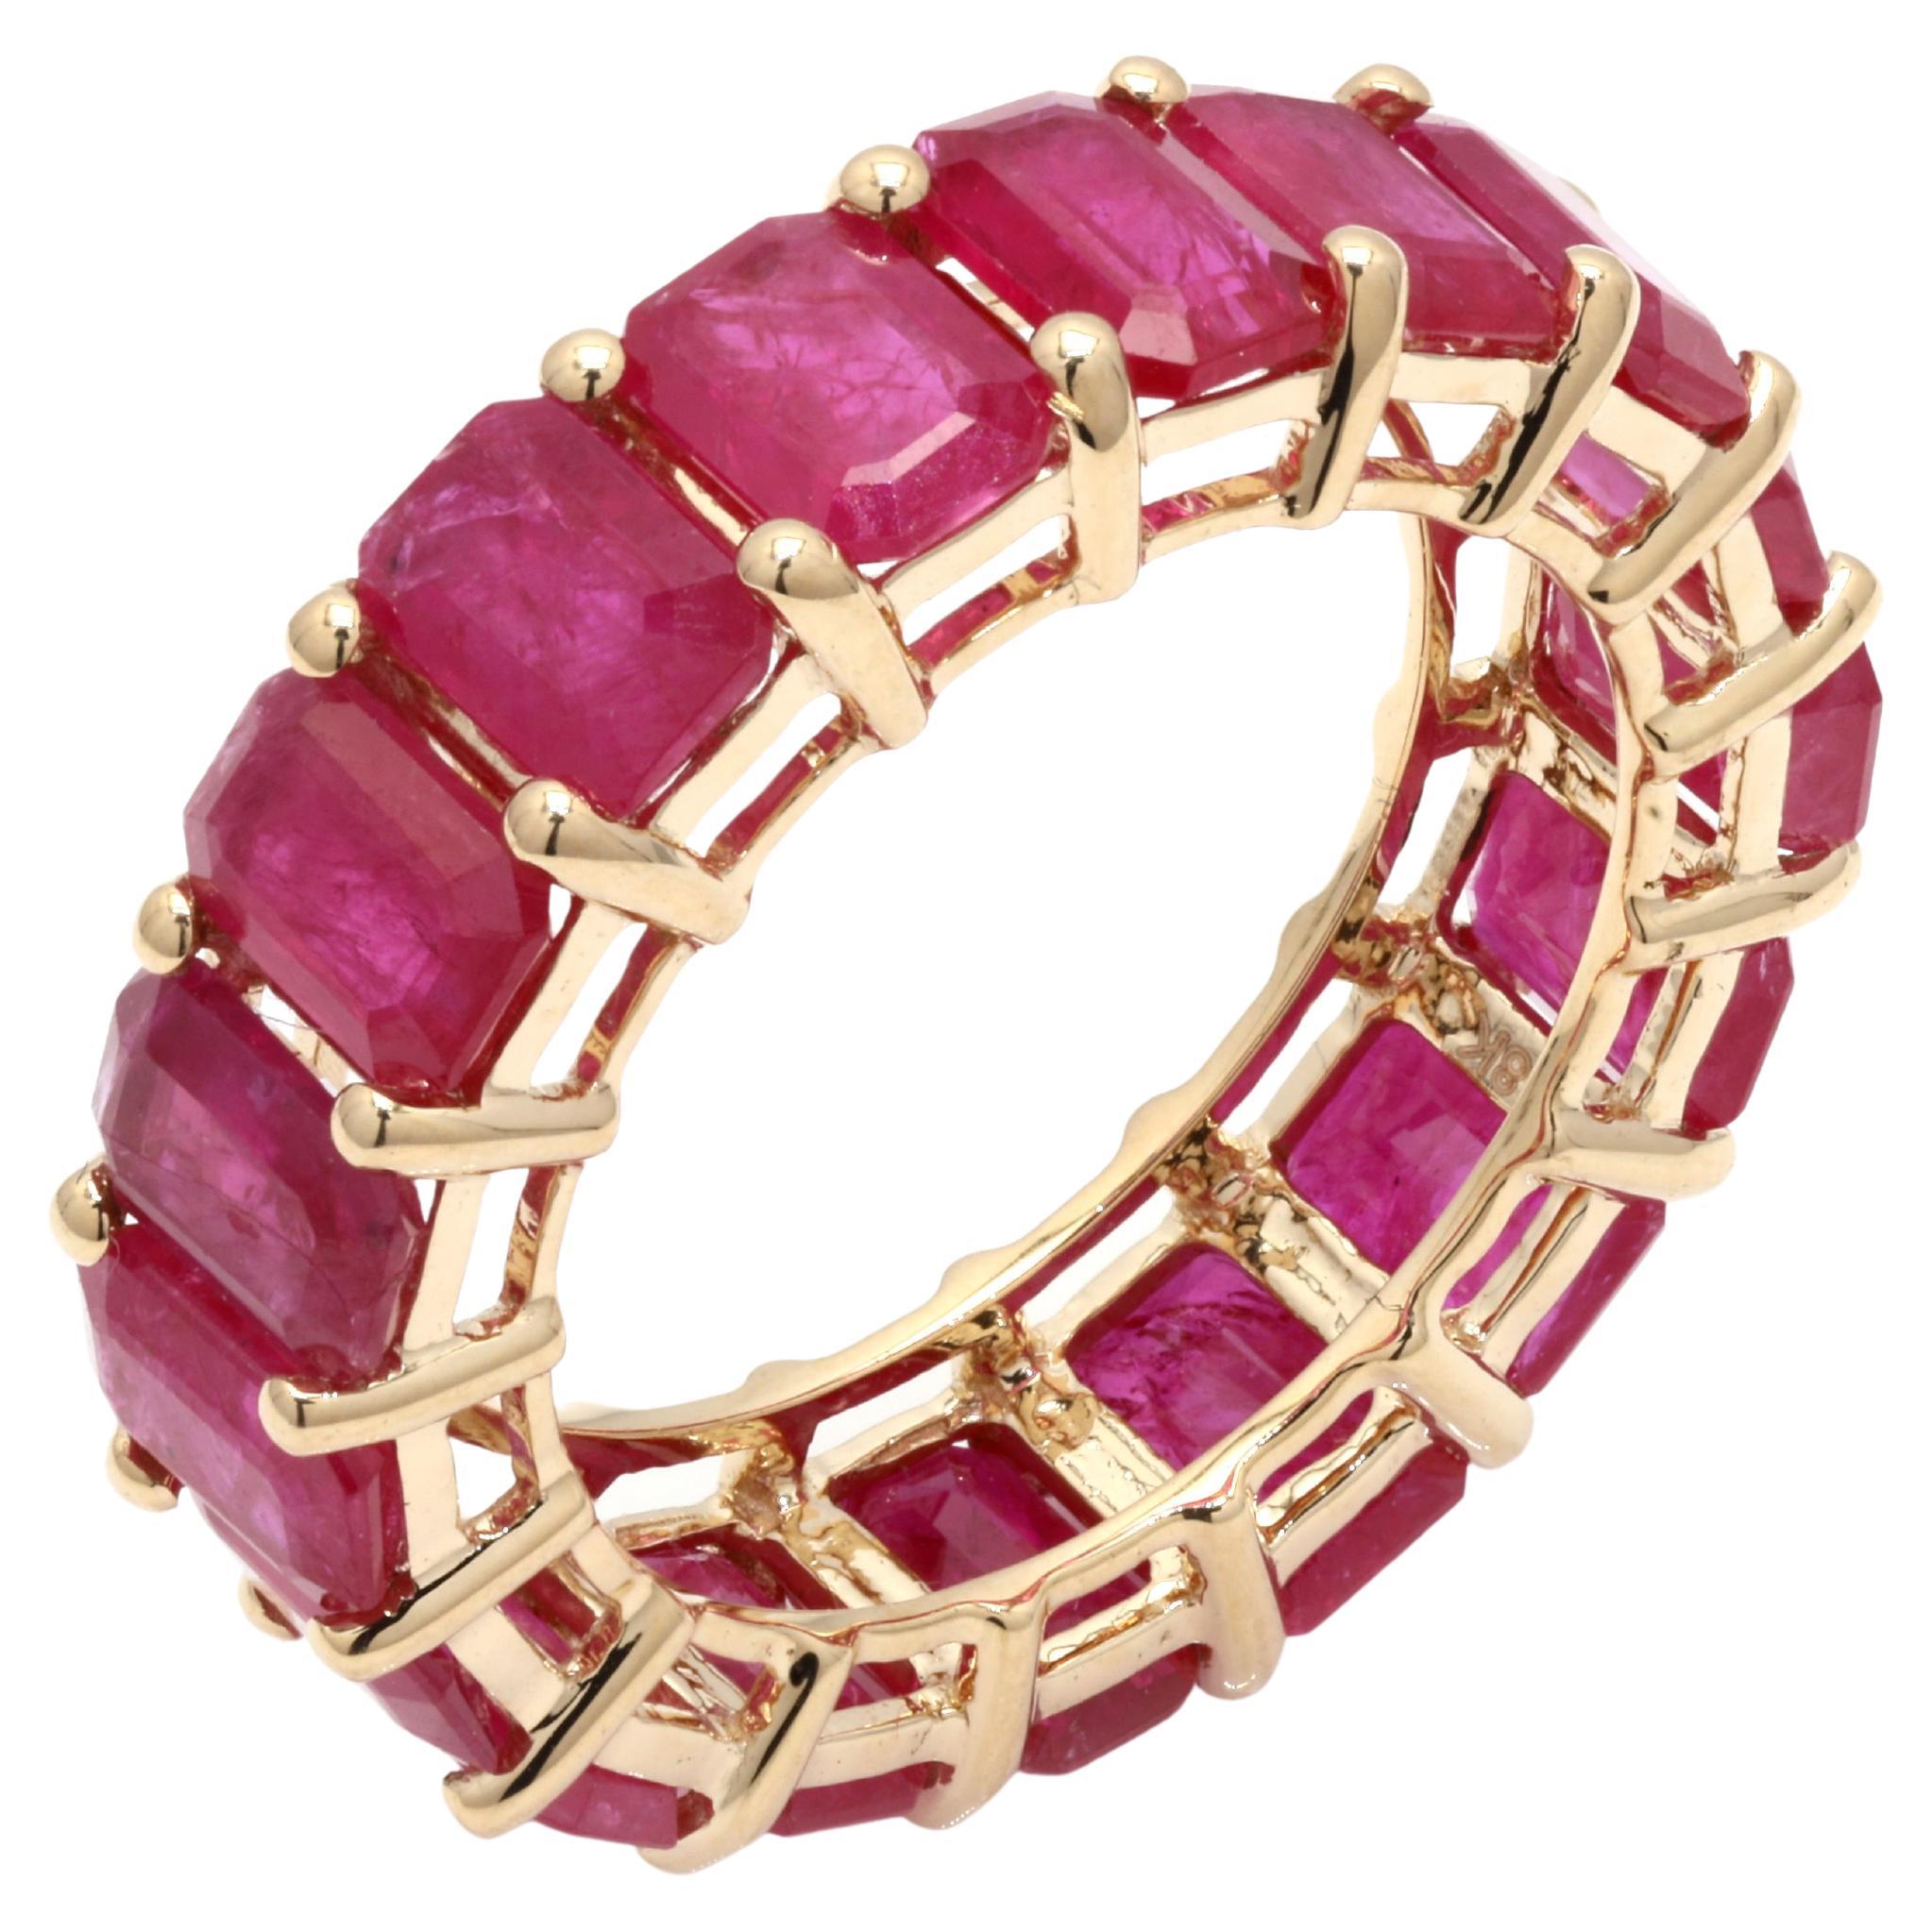 For Sale:  Magnificent 10.91 ct Ruby Eternity Band Ring 14k Yellow Gold Gift for Her